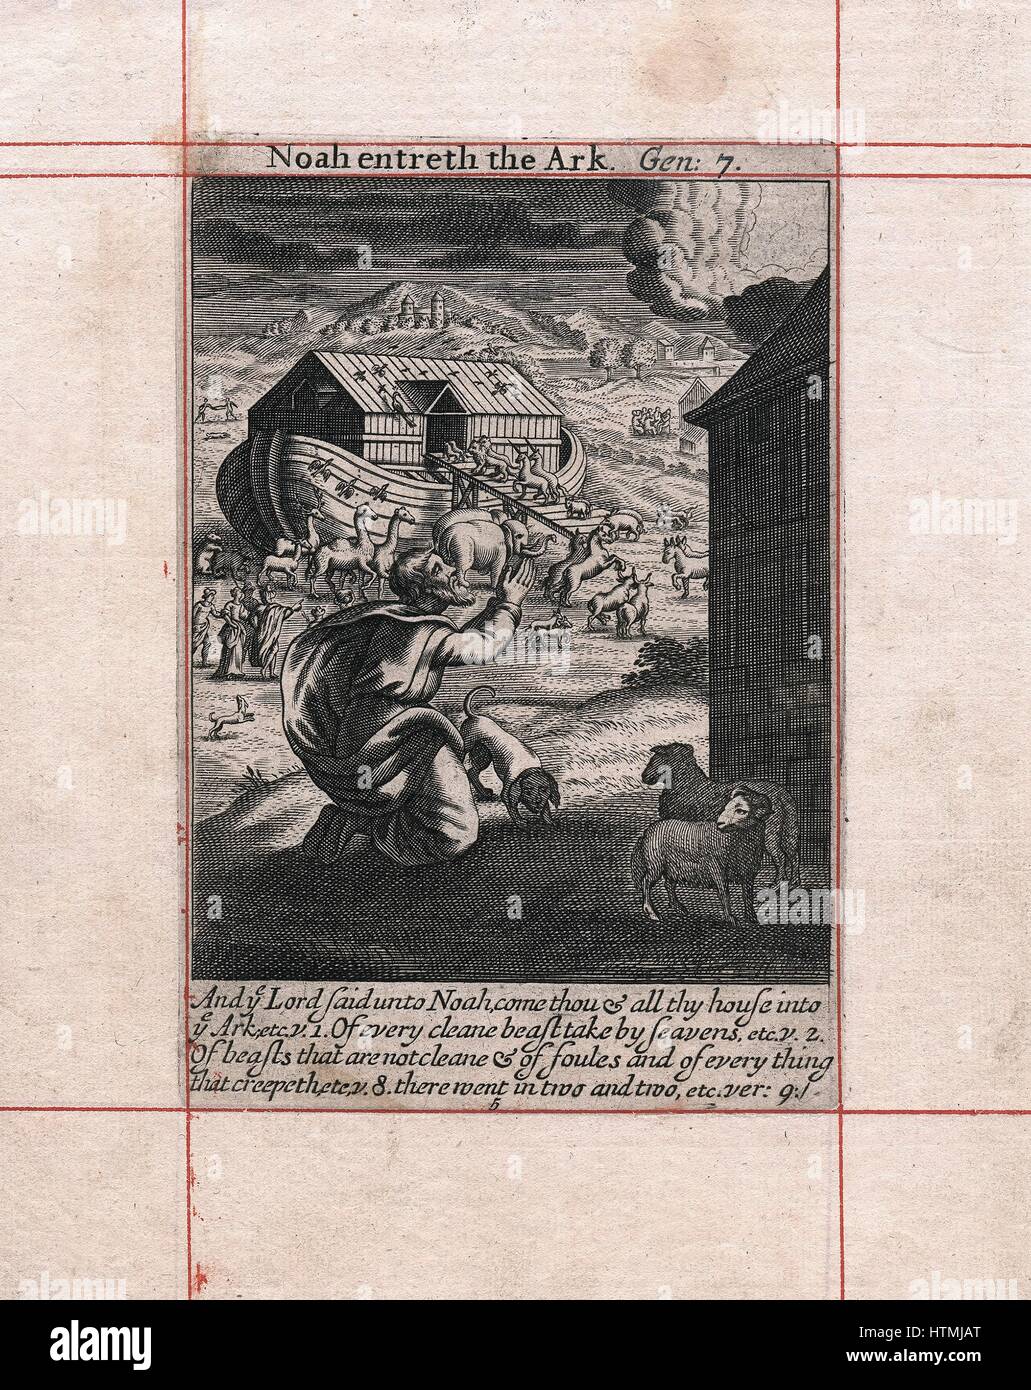 Noah's Ark - the animals going in two by two. God saving the chosen from flood sent as punishment to the masses. 'Bible' Genesis 7. Some climatologists suggest flood on which legend is based was caused by global warming. Copperplate engraving of 1716 Stock Photo